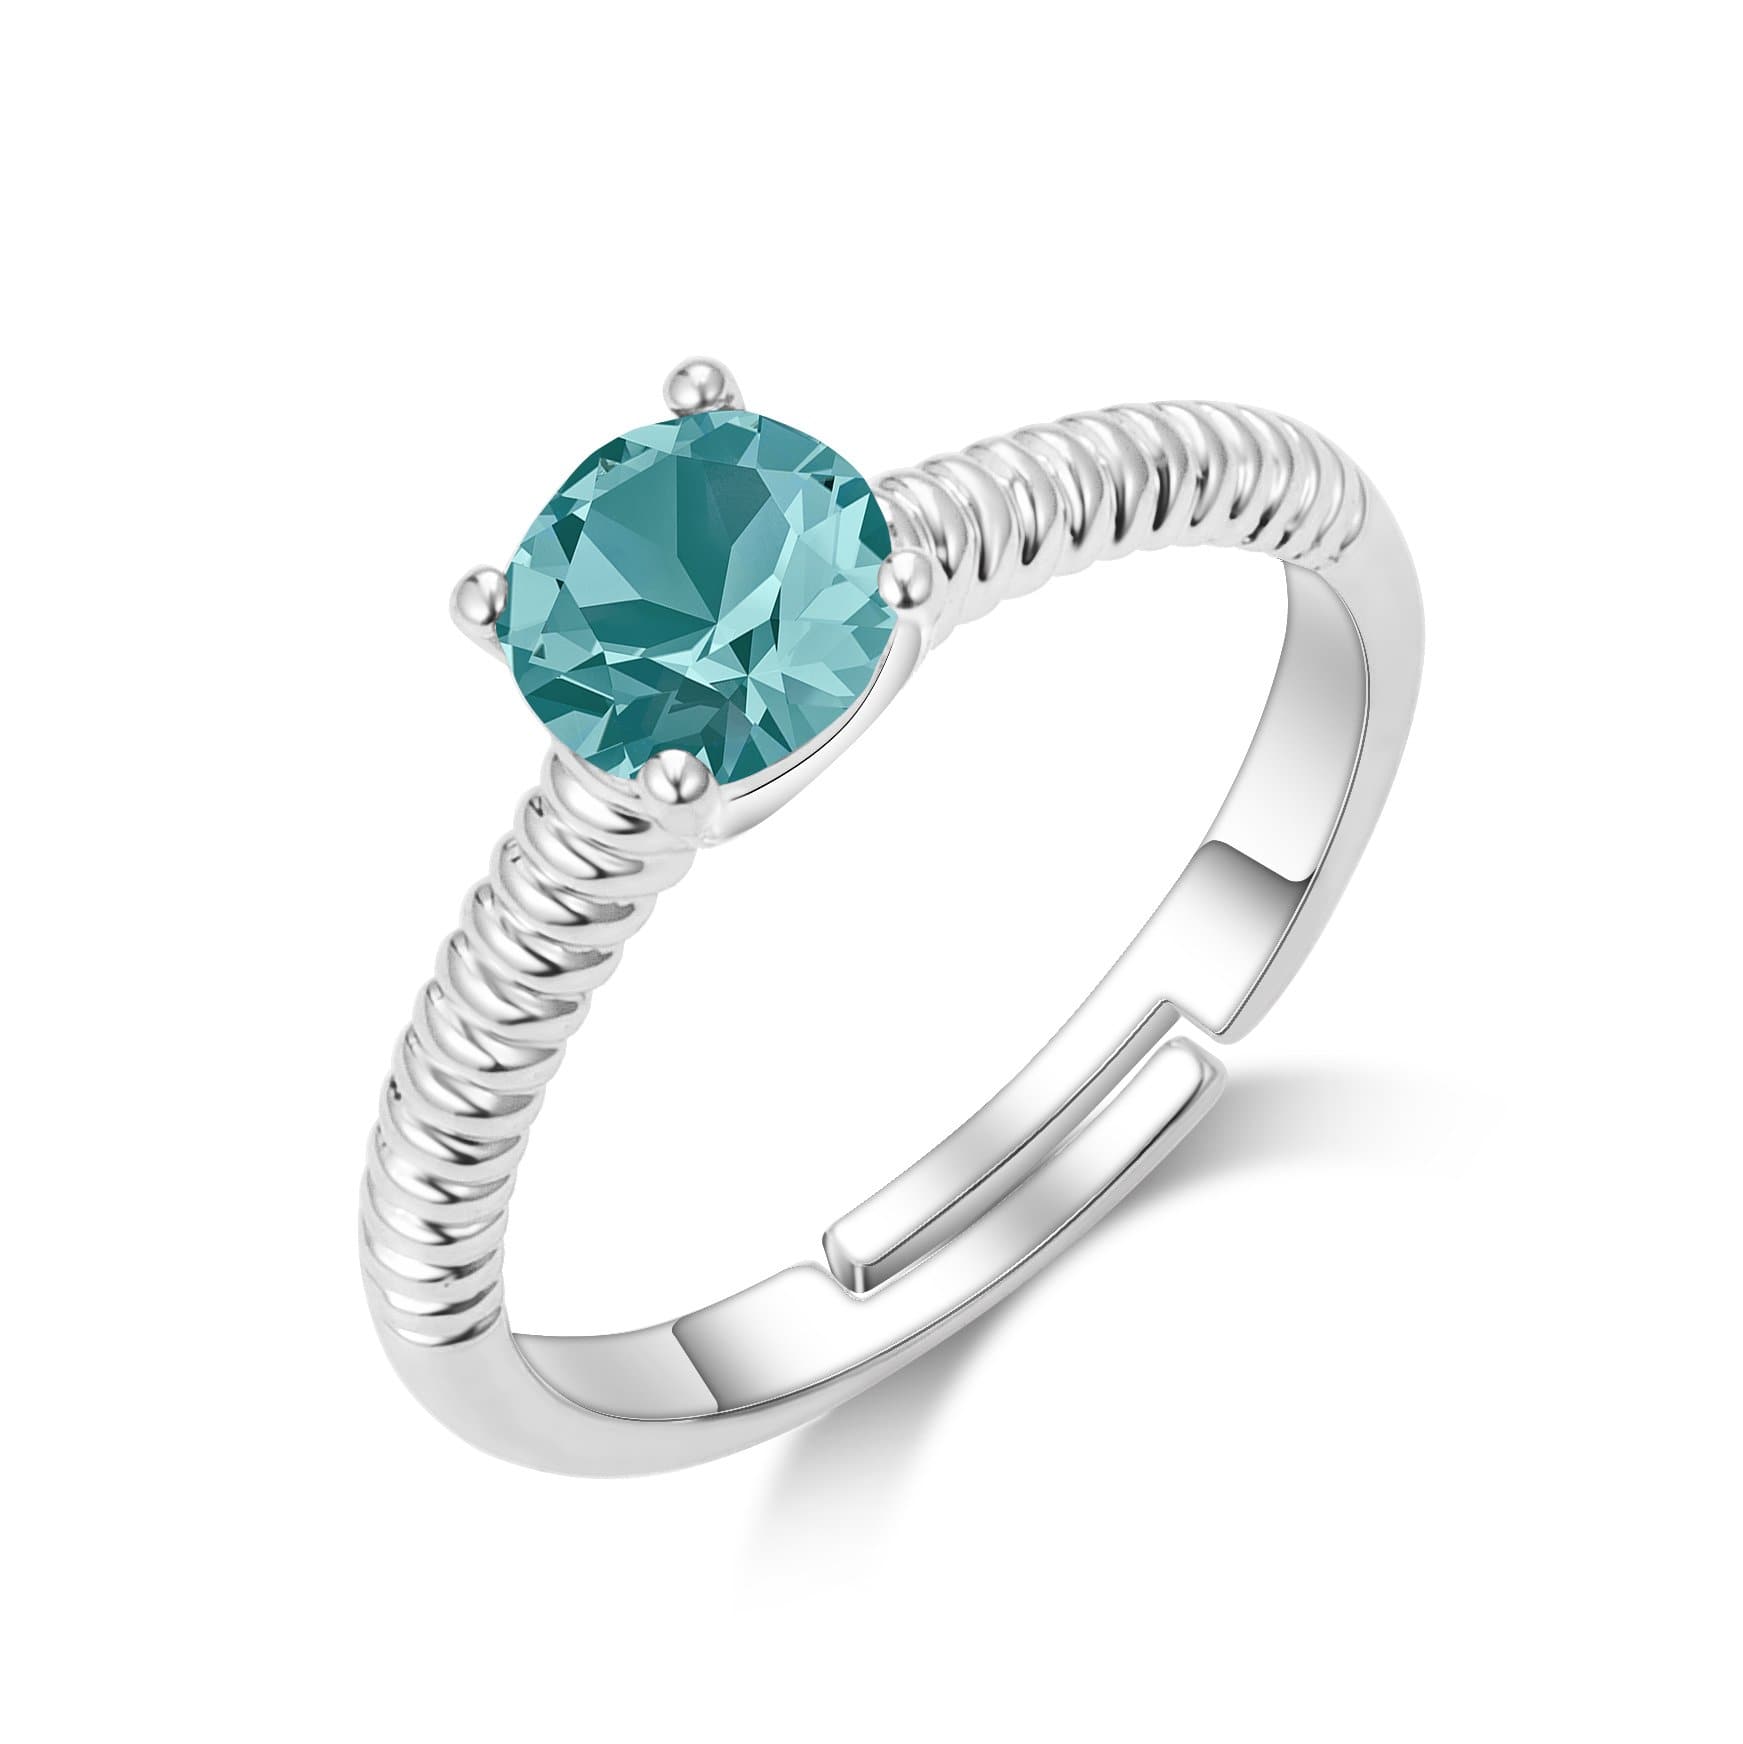 Blue Adjustable Crystal Ring Created with Zircondia® Crystals by Philip Jones Jewellery